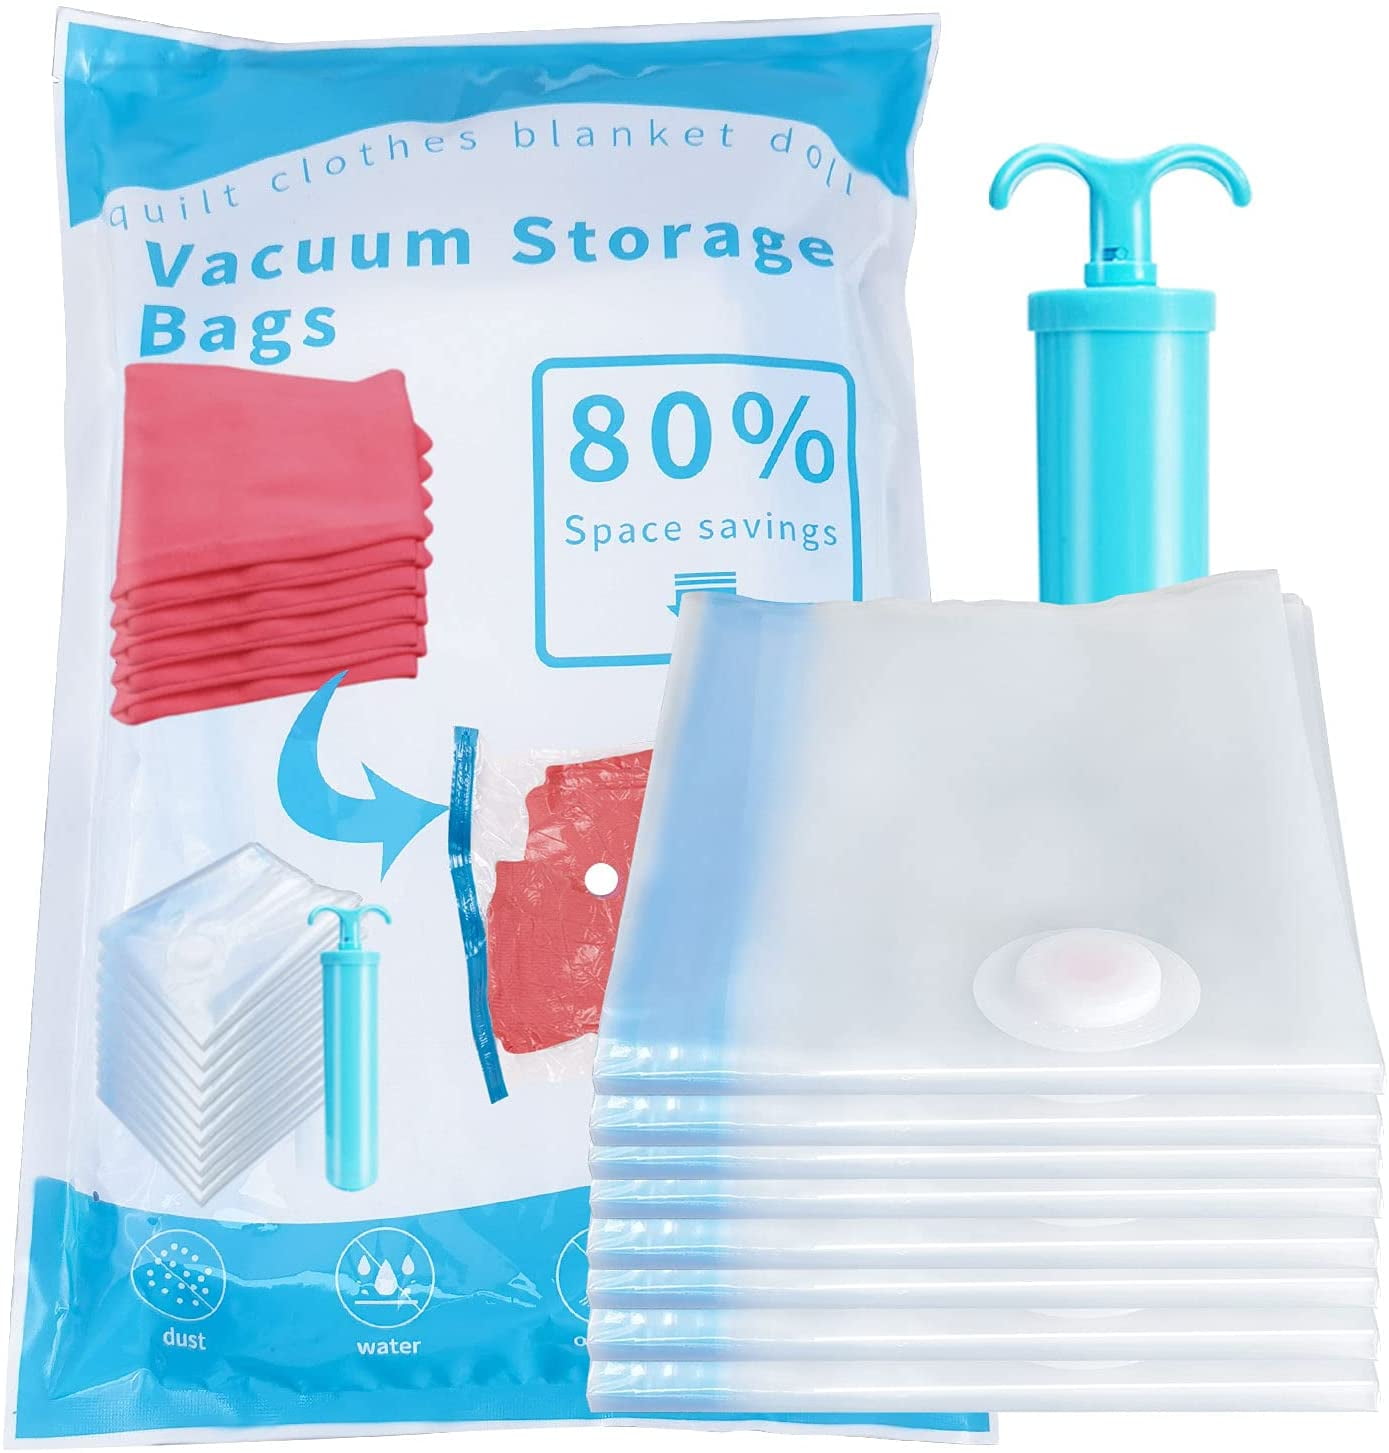 TAILI Vacuum Storage Bags for Clothes Blankets Pillows 4 Pack Small 45 x 70cm 80% More Storage Double-Zip Seal and Triple Seal Turbo-Valve for Max Space Saving No Pumps Needed for Travel 